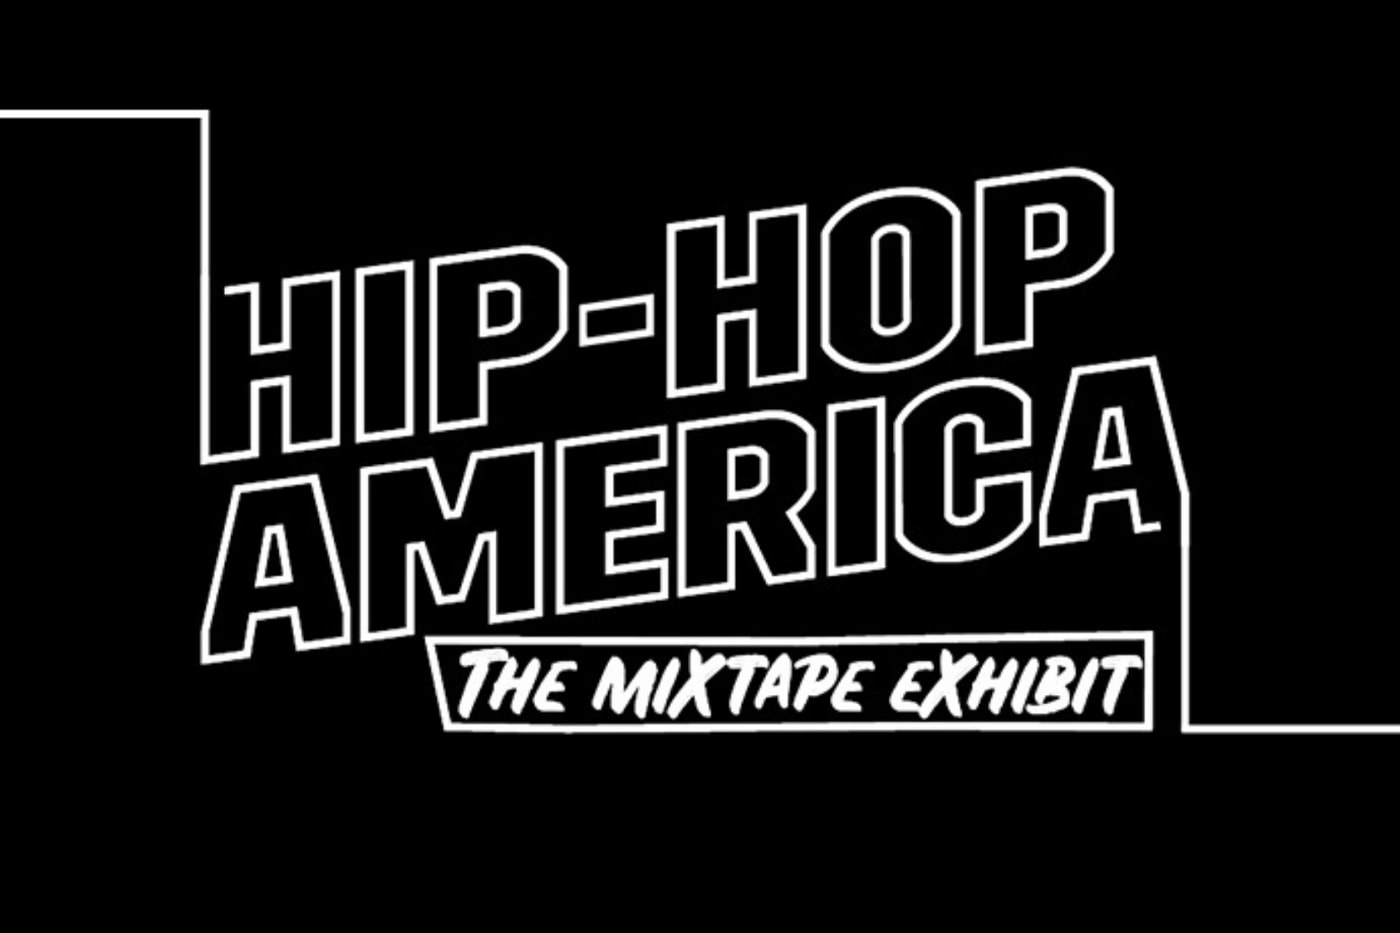 Celebrating the 50th Anniversary of Hip-Hop